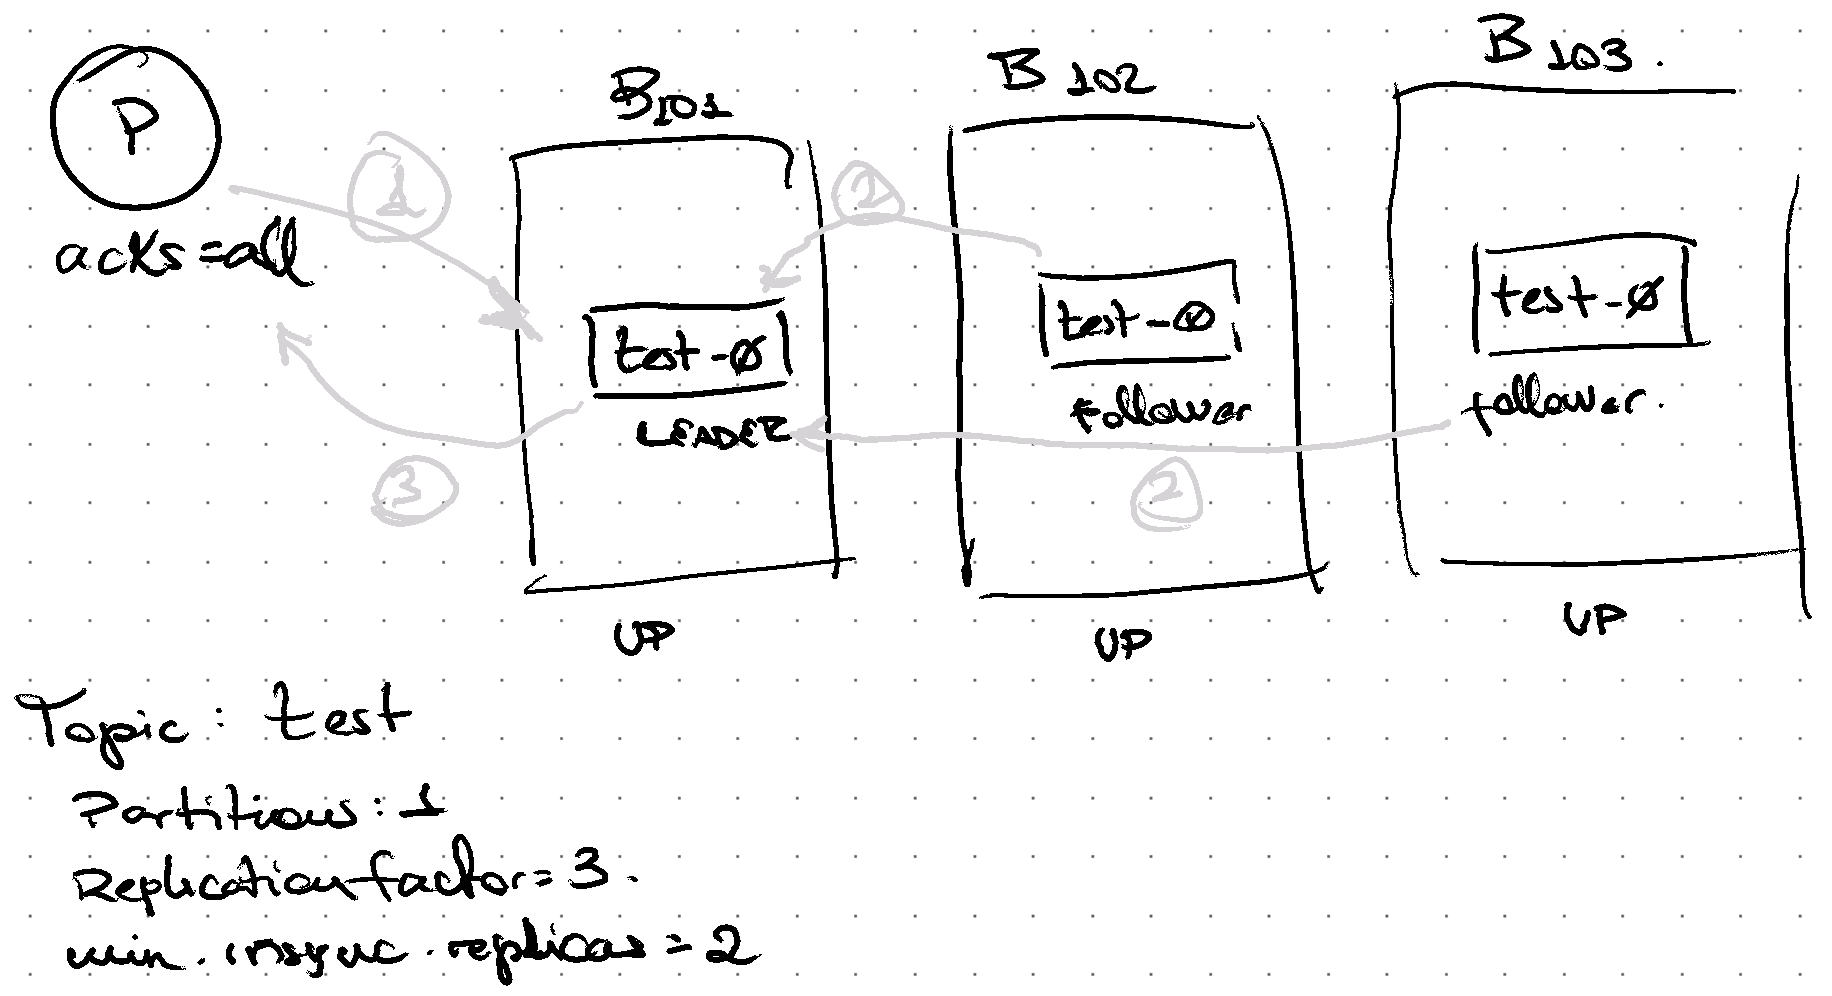 Use min.insync.replicas for fault-tolerance minisr2-1.png